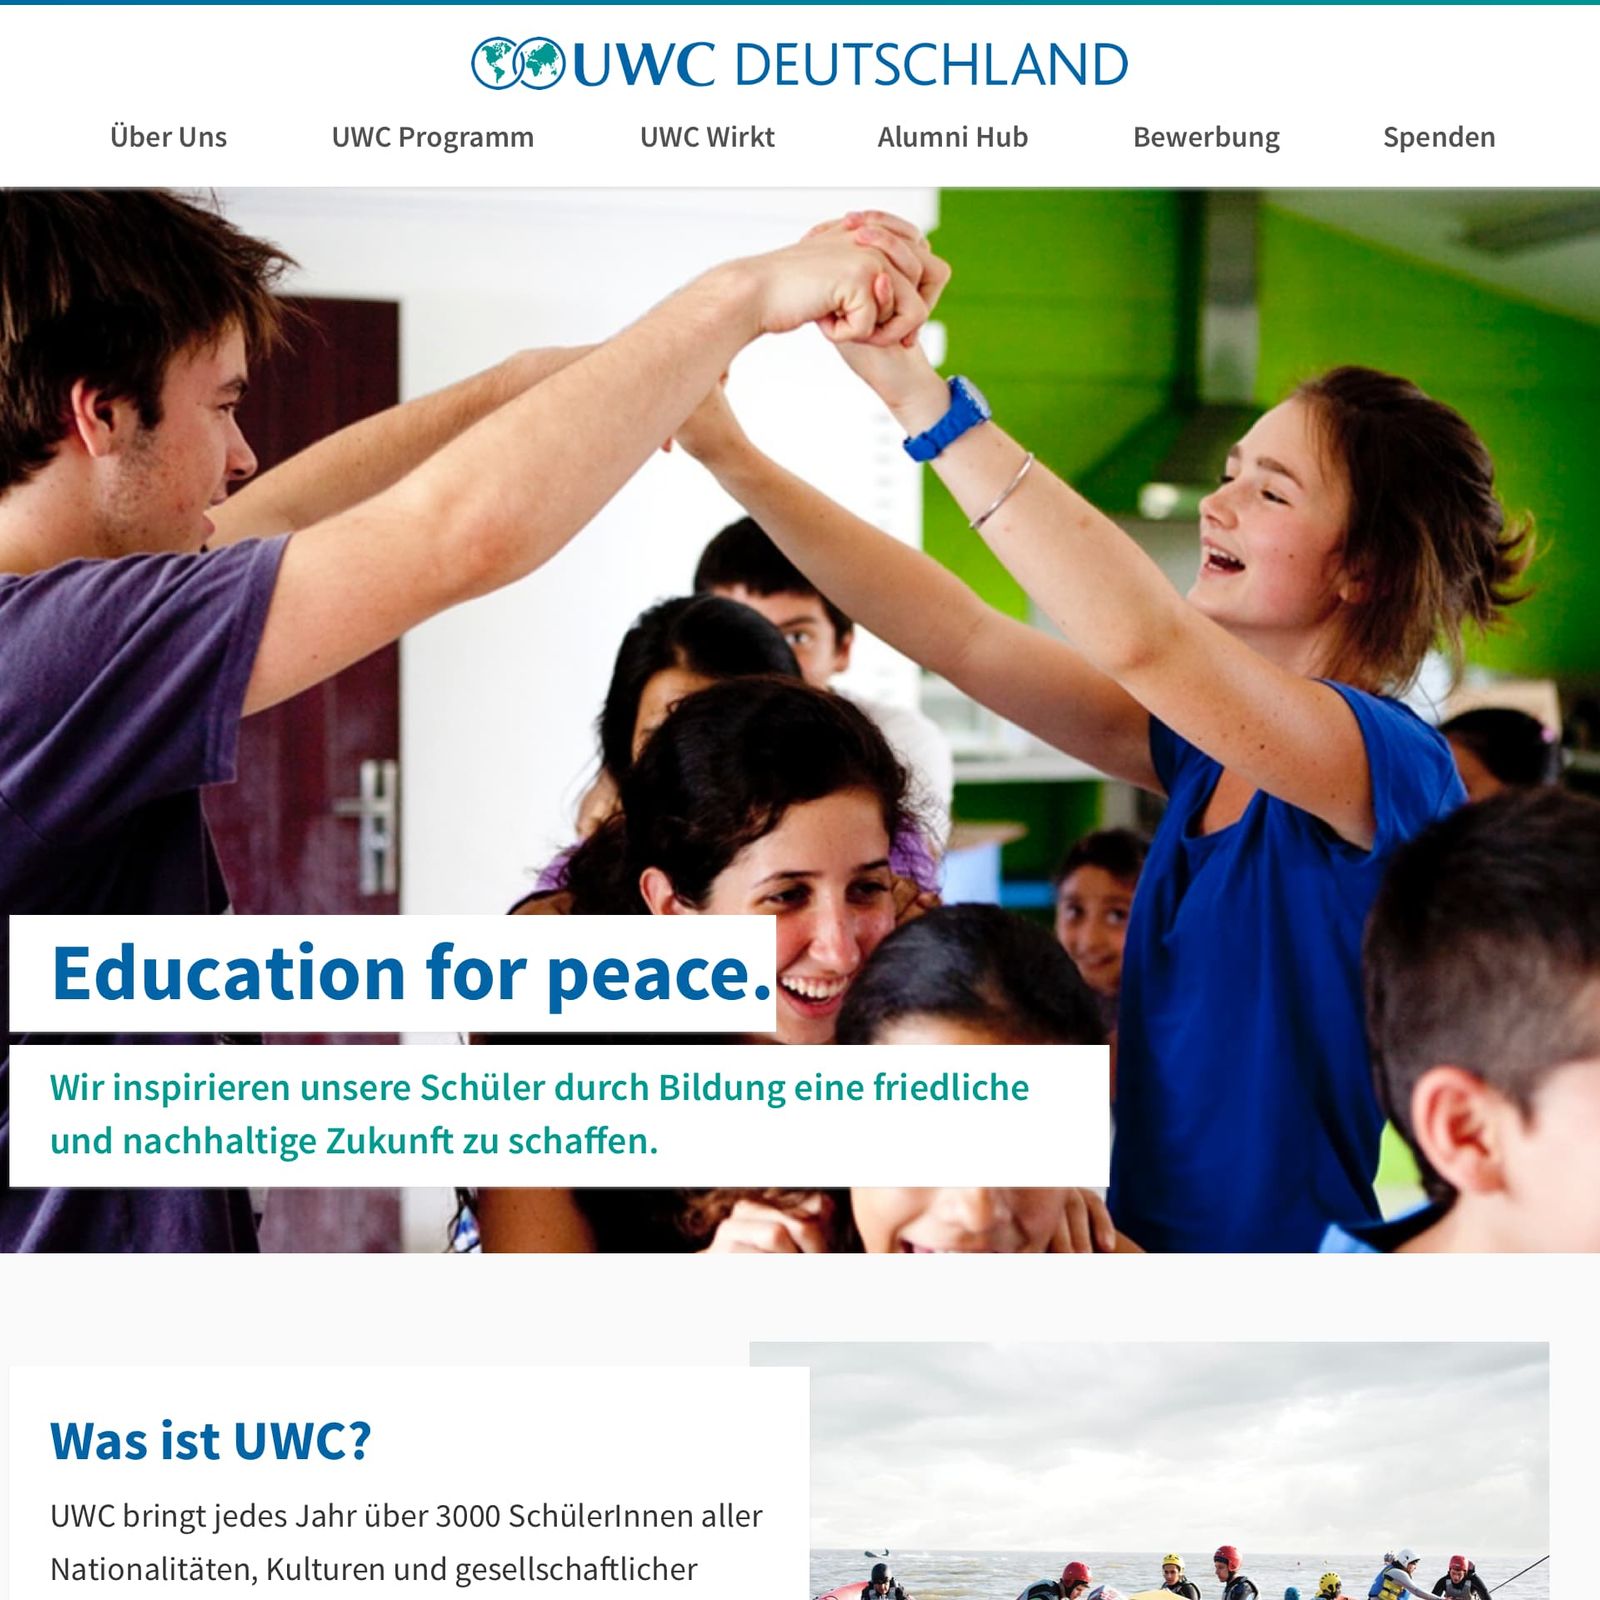 Third mockup of uwc.de. The headline and subheadline have a white background for better legibility, and the logo in the navigation bar is larger